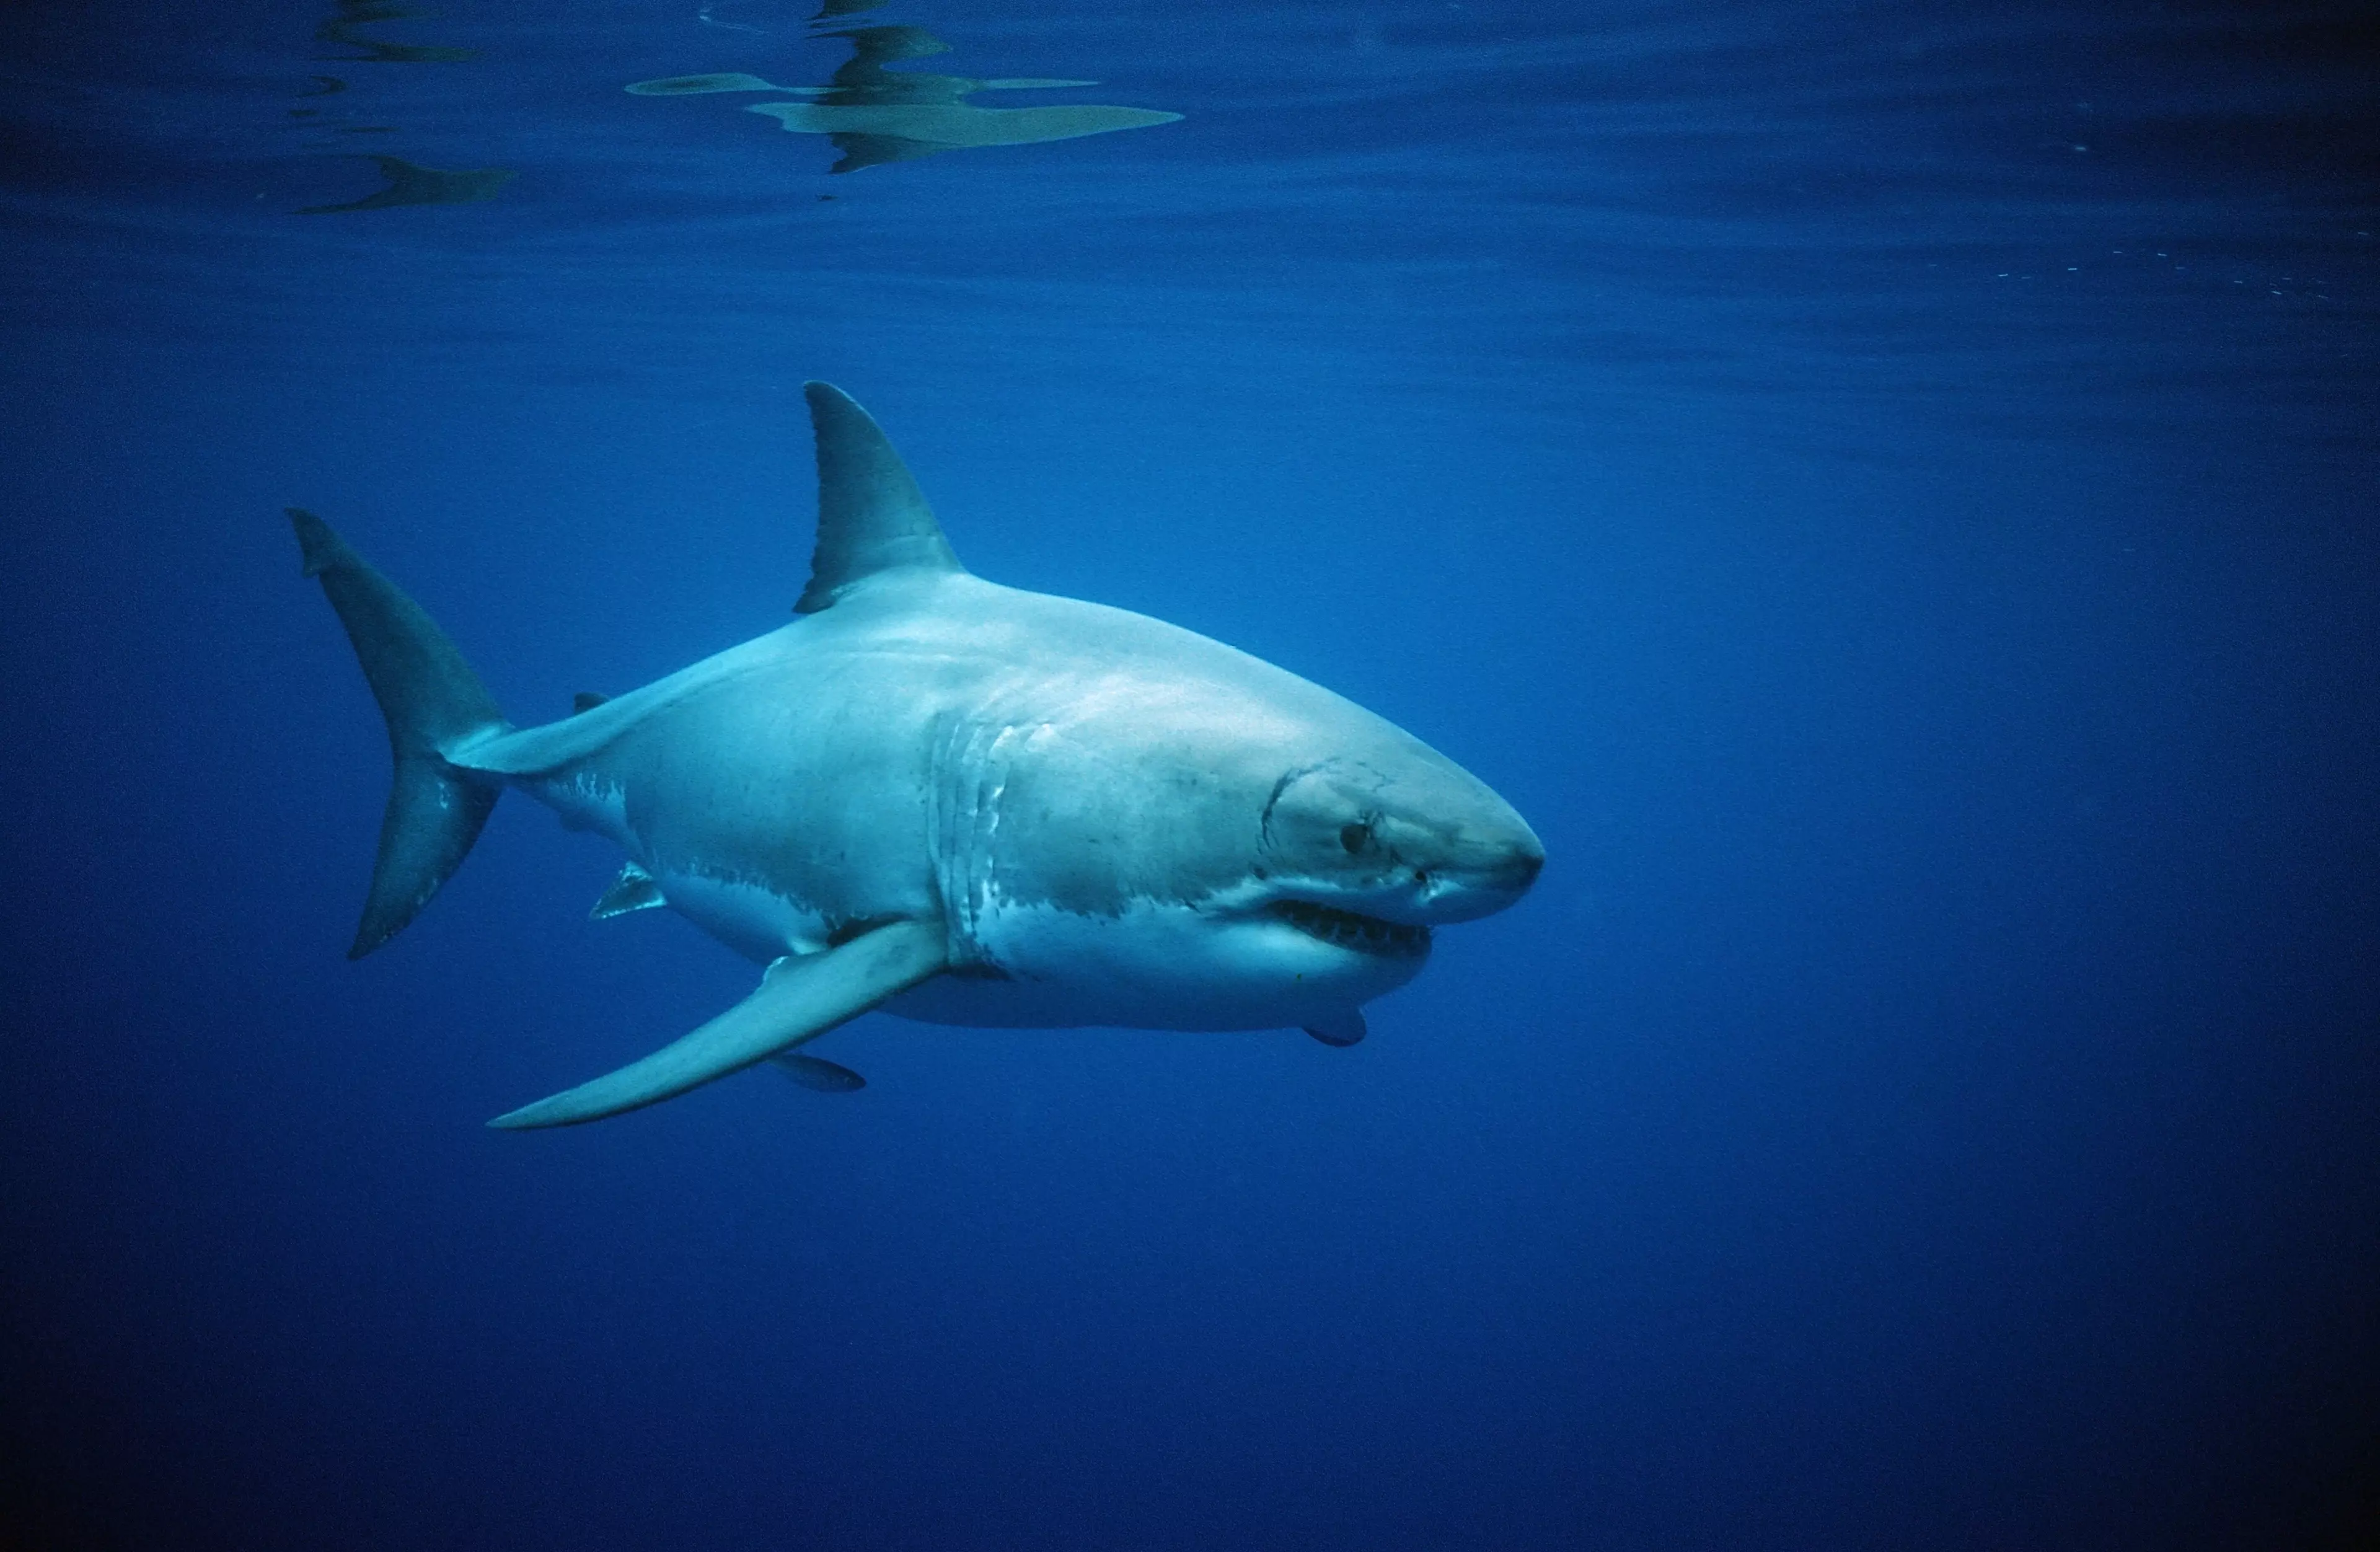 Great white shark - Look at this absolute unit.